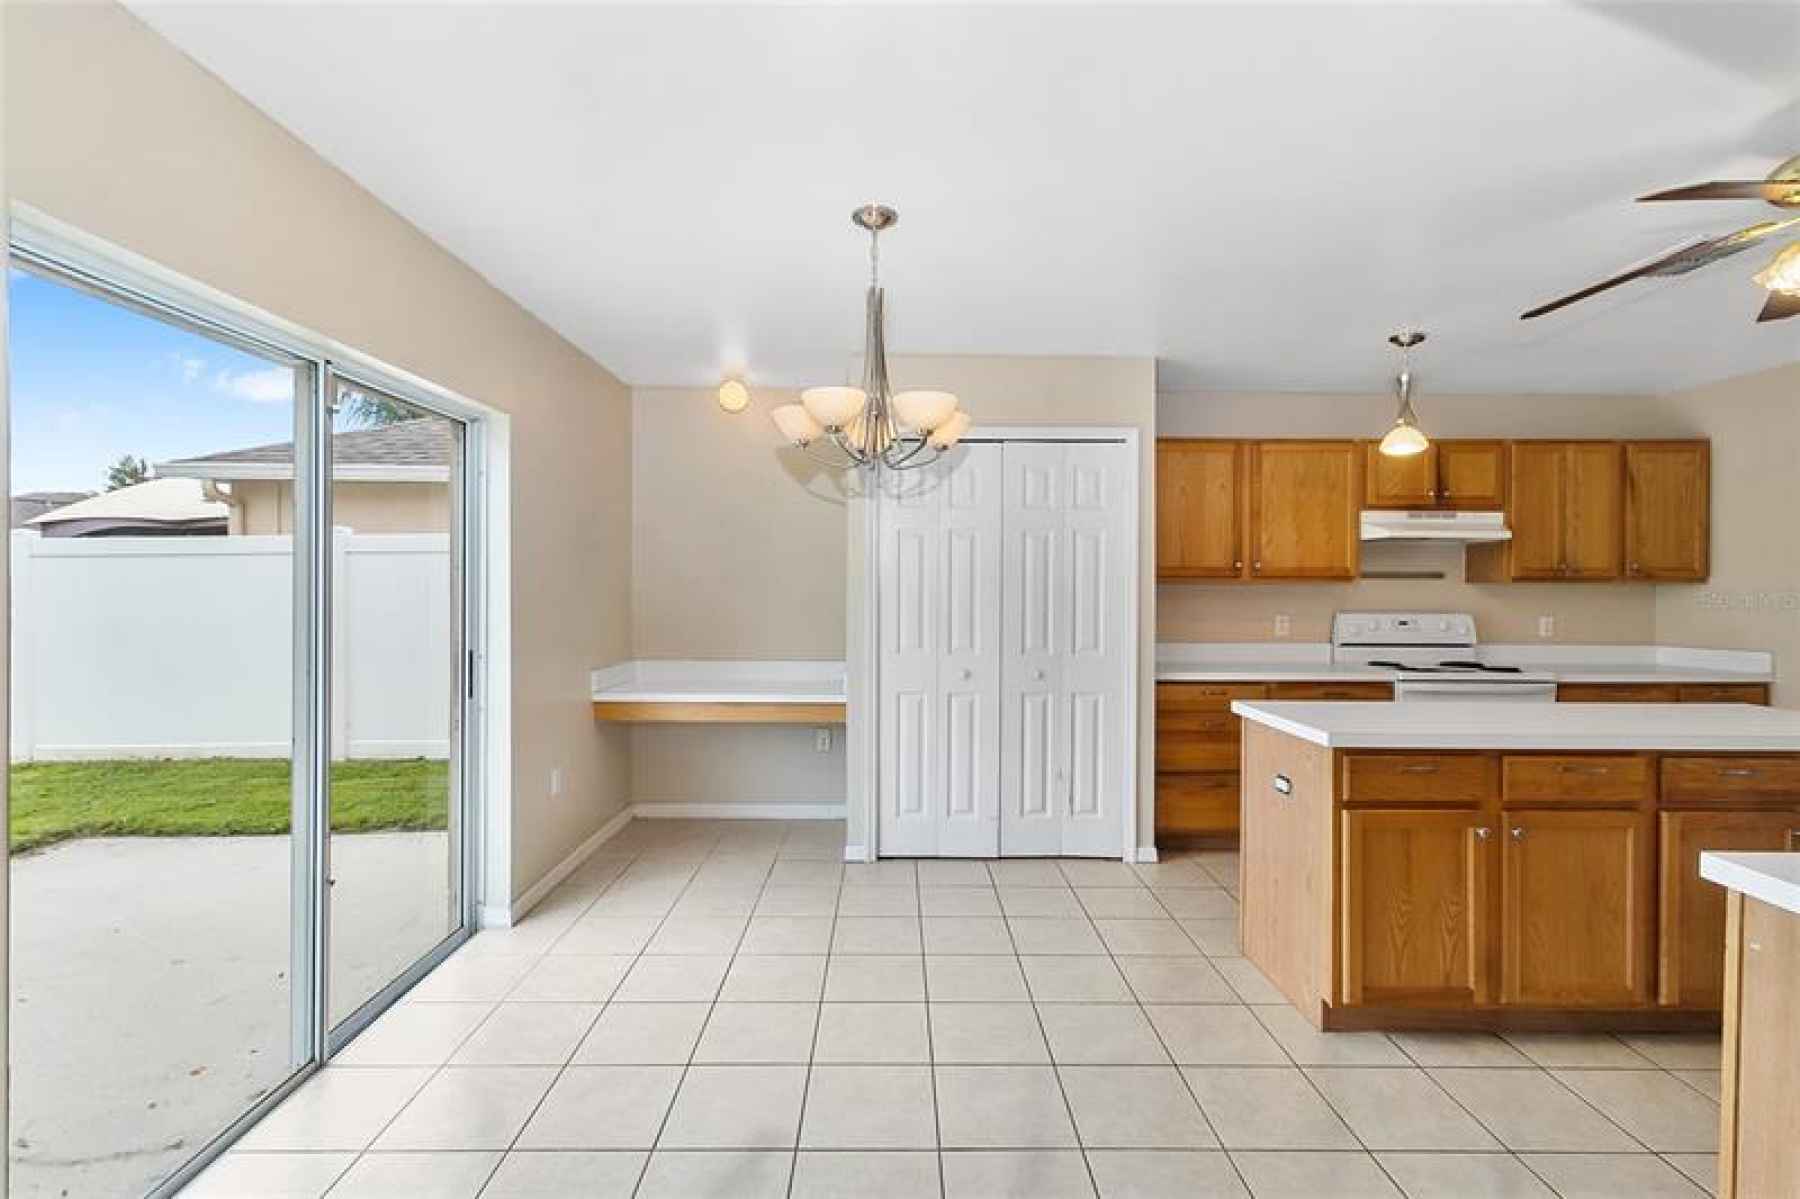 Eat-in kitchen provides dining room and convenient coffee bar/work-from-home station.